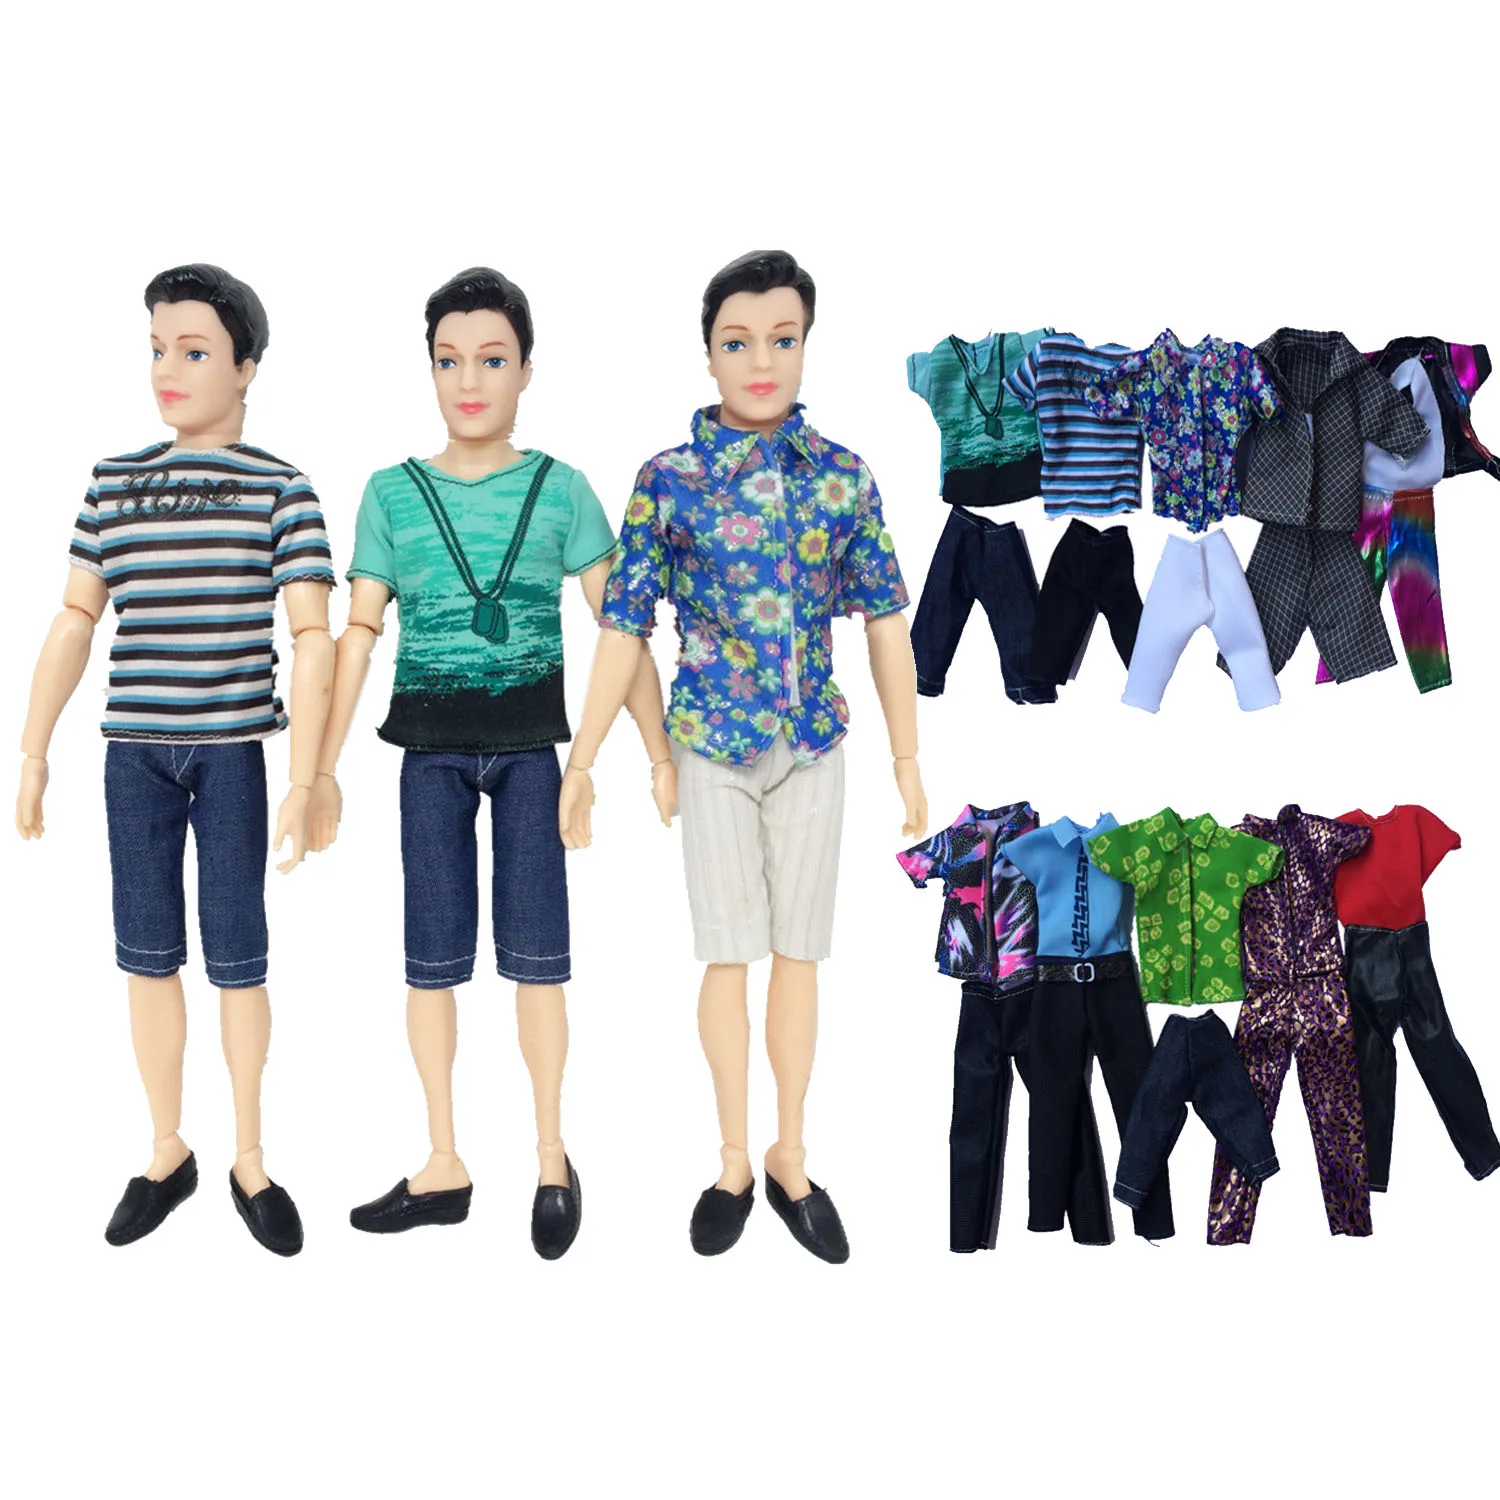 5 Sets Fashion Mini Men Doll Casual Wear Doll Clothes Jacket Pants T-shirts Trousers Outfits Accessories for Barbie Ken Toy